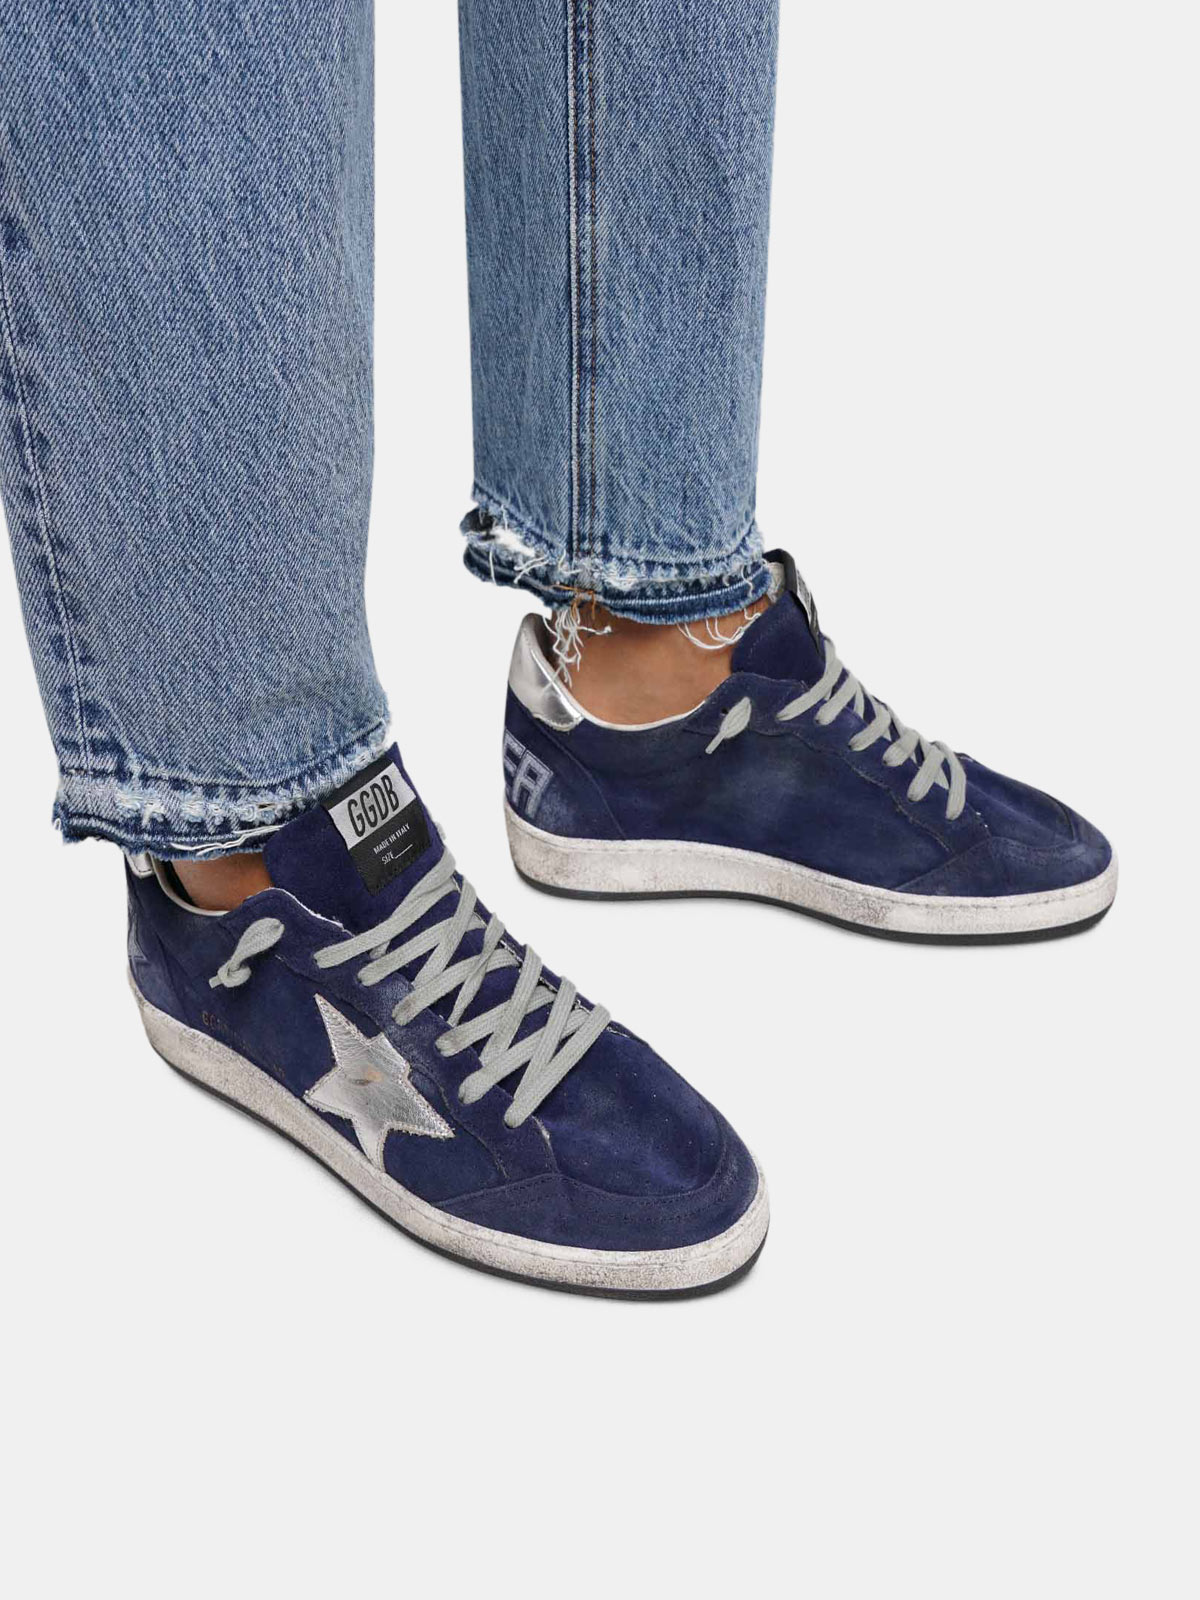 Ball Star sneakers in navy blue suede with silver star | Golden Goose